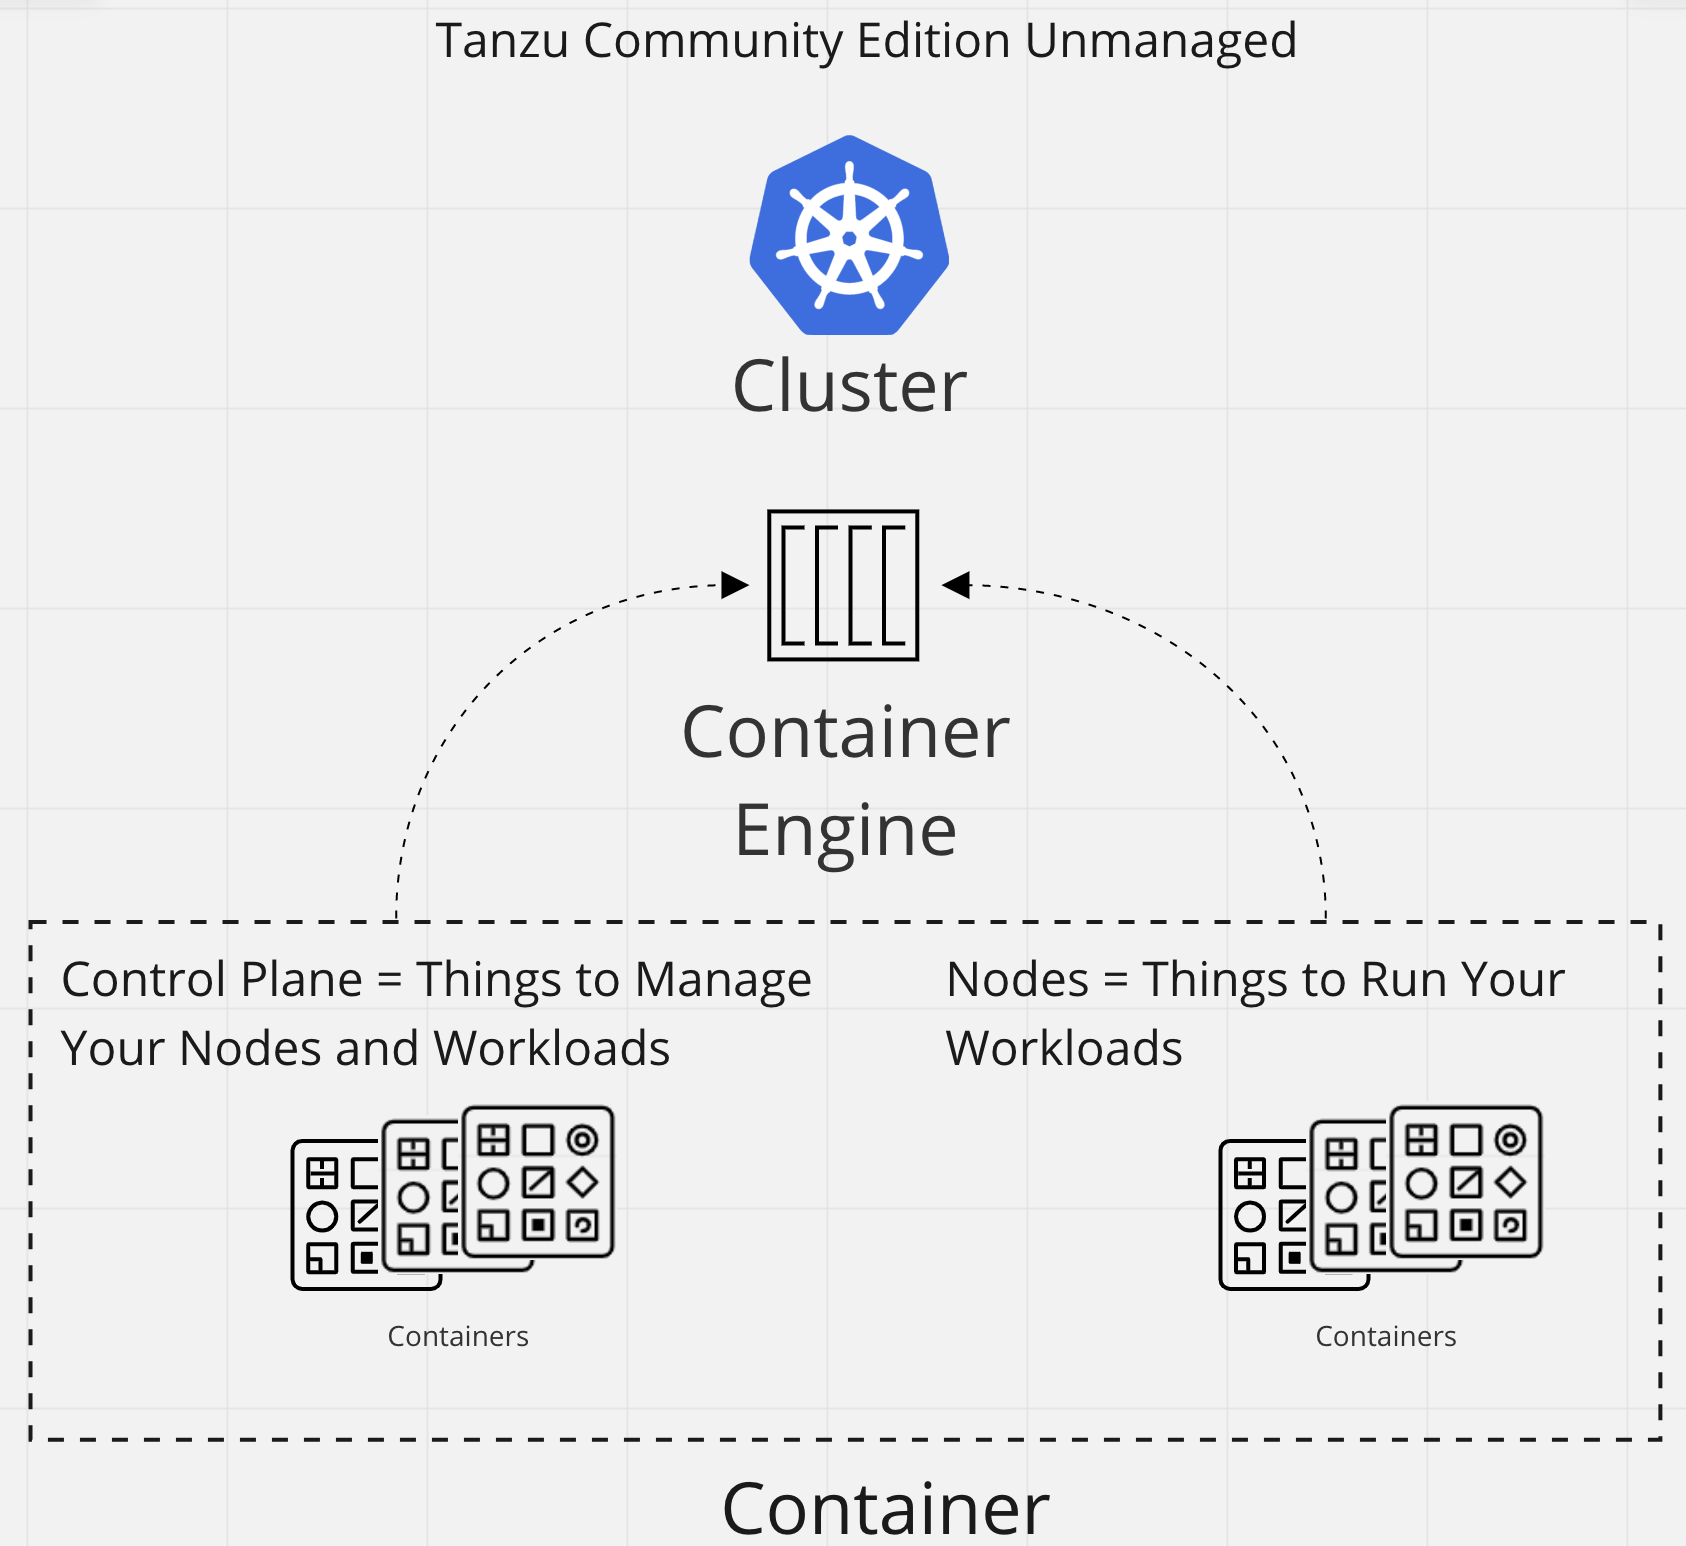 &ldquo;Tanzu Community Edition Unmanaged Cluster Control Plane and Nodes in Container&rdquo;